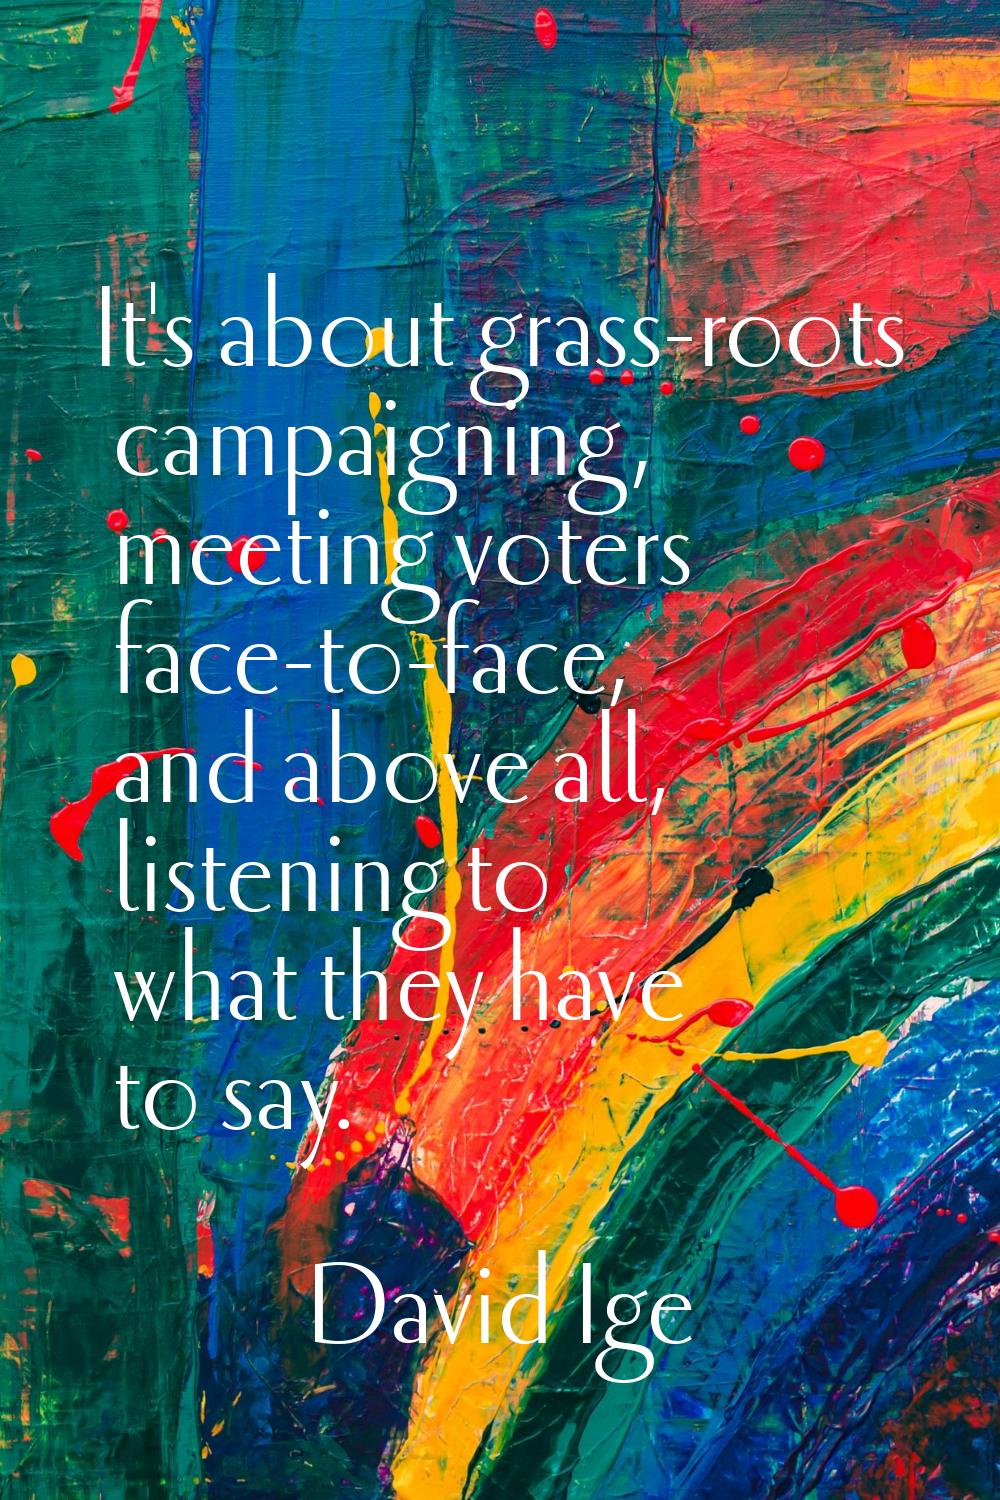 It's about grass-roots campaigning, meeting voters face-to-face, and above all, listening to what t